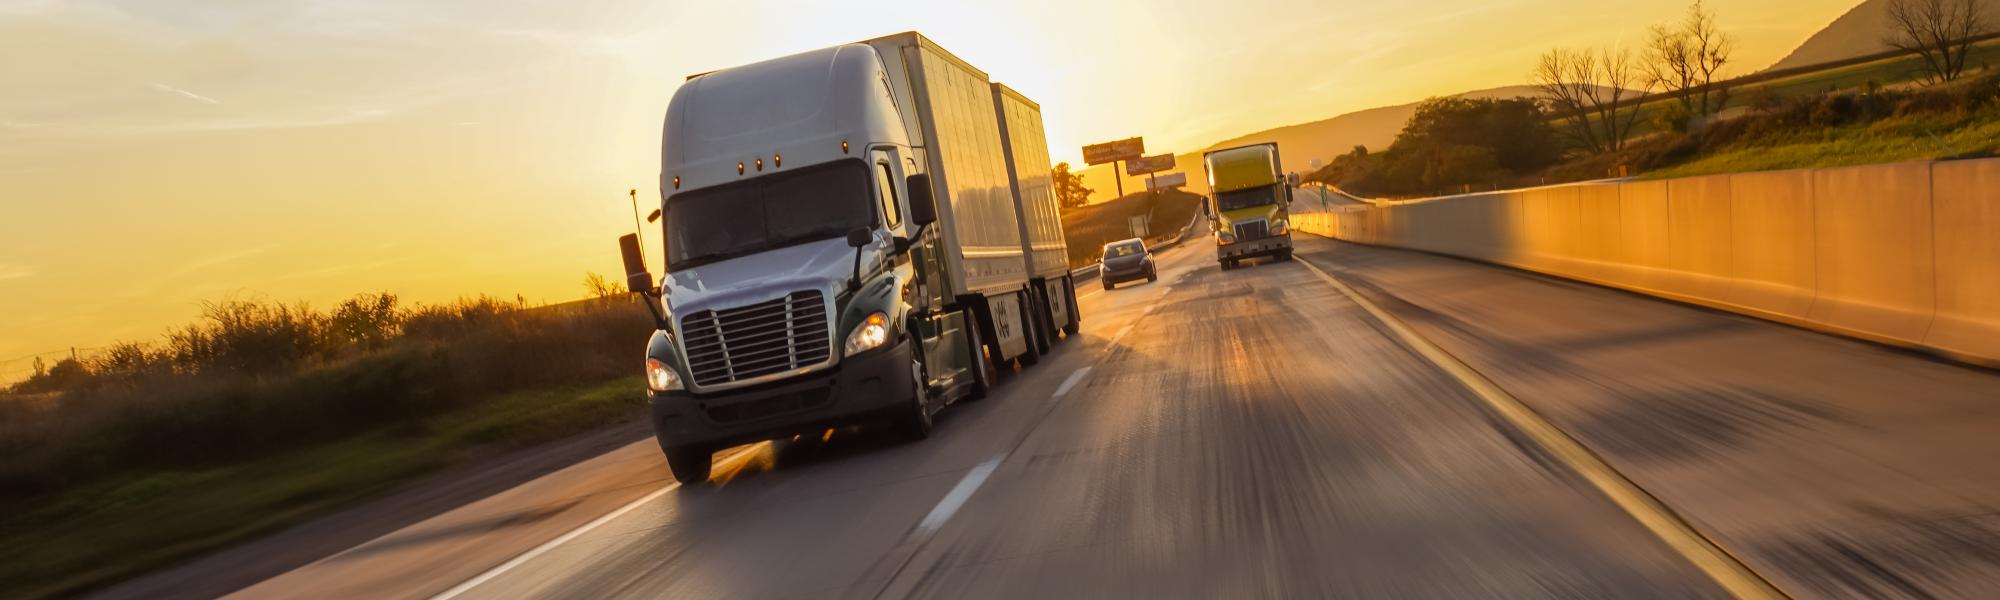 Driver shortage: Global problem, North American solutions?